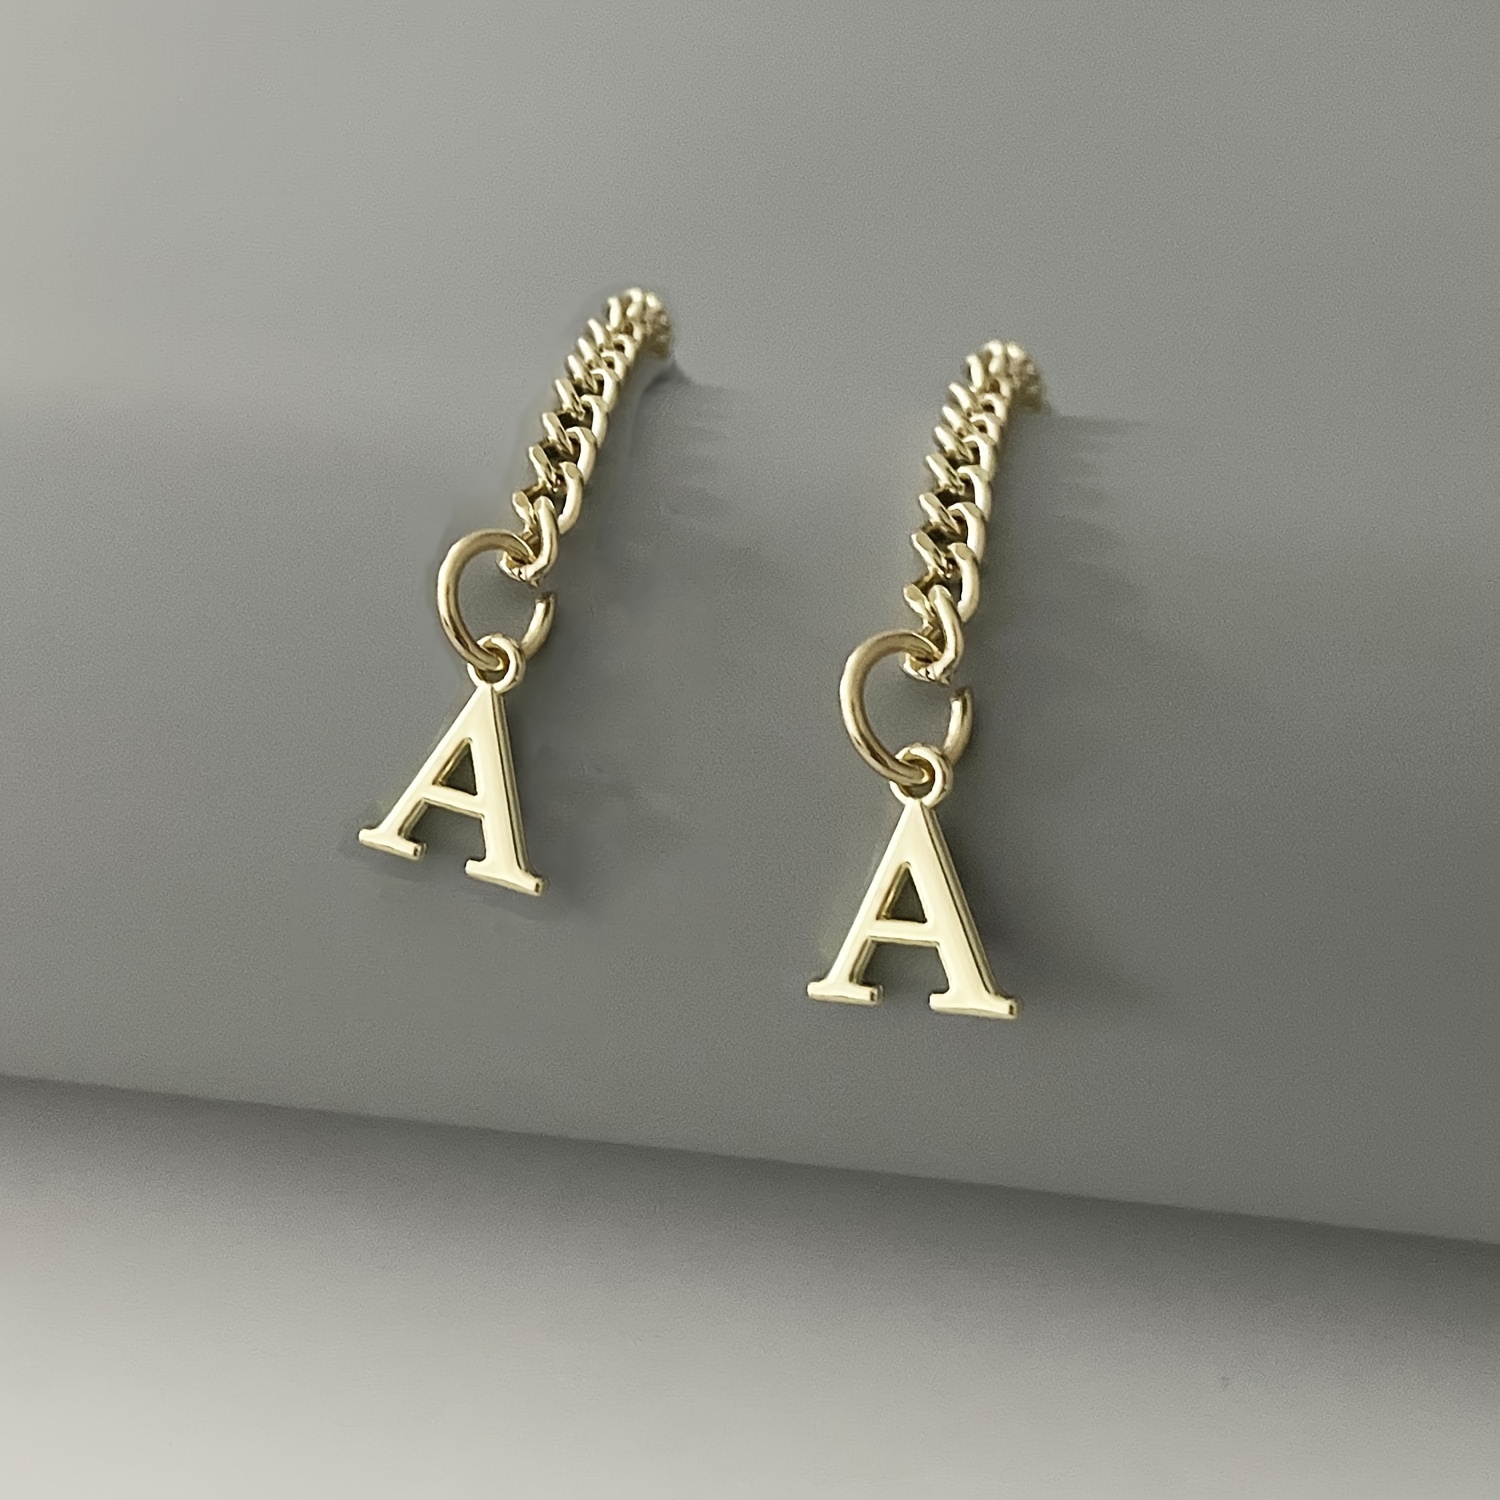  2PCS A Letter Charm Accessories for Stanley Cup